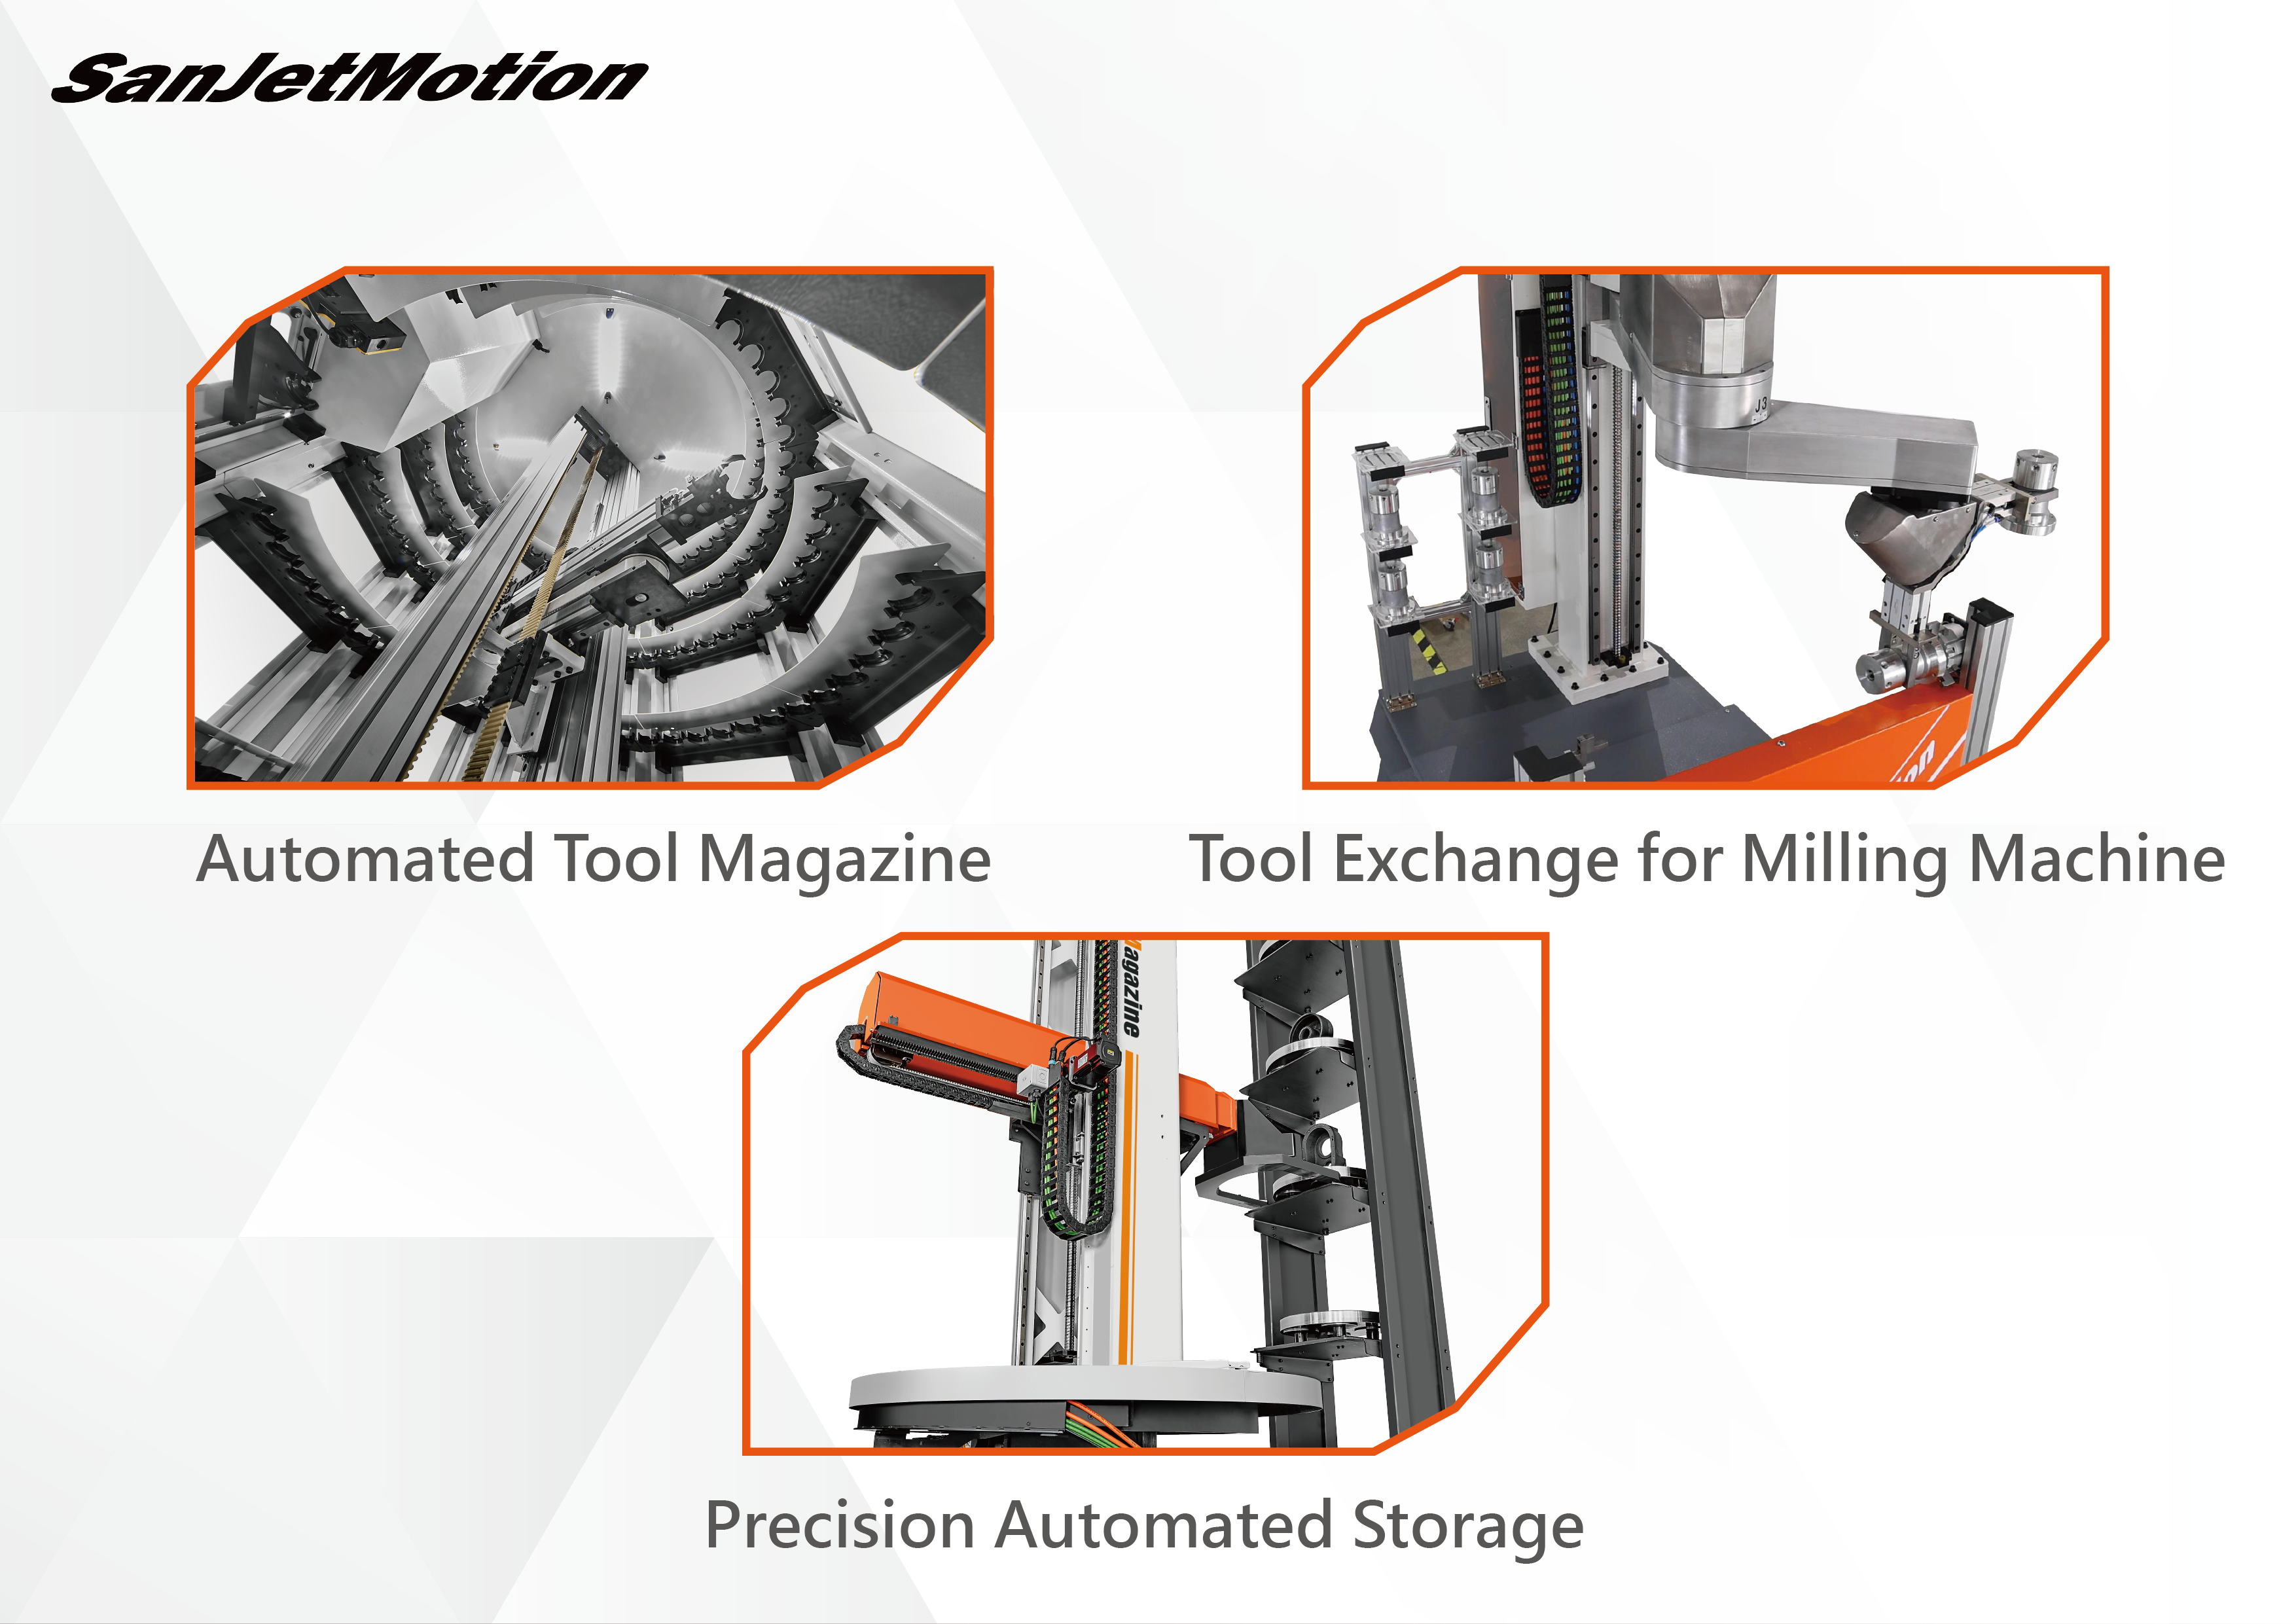 < Tool Exchange for Milling Machine / Precision Automated Storage / Precision Automated Tool Magazine >